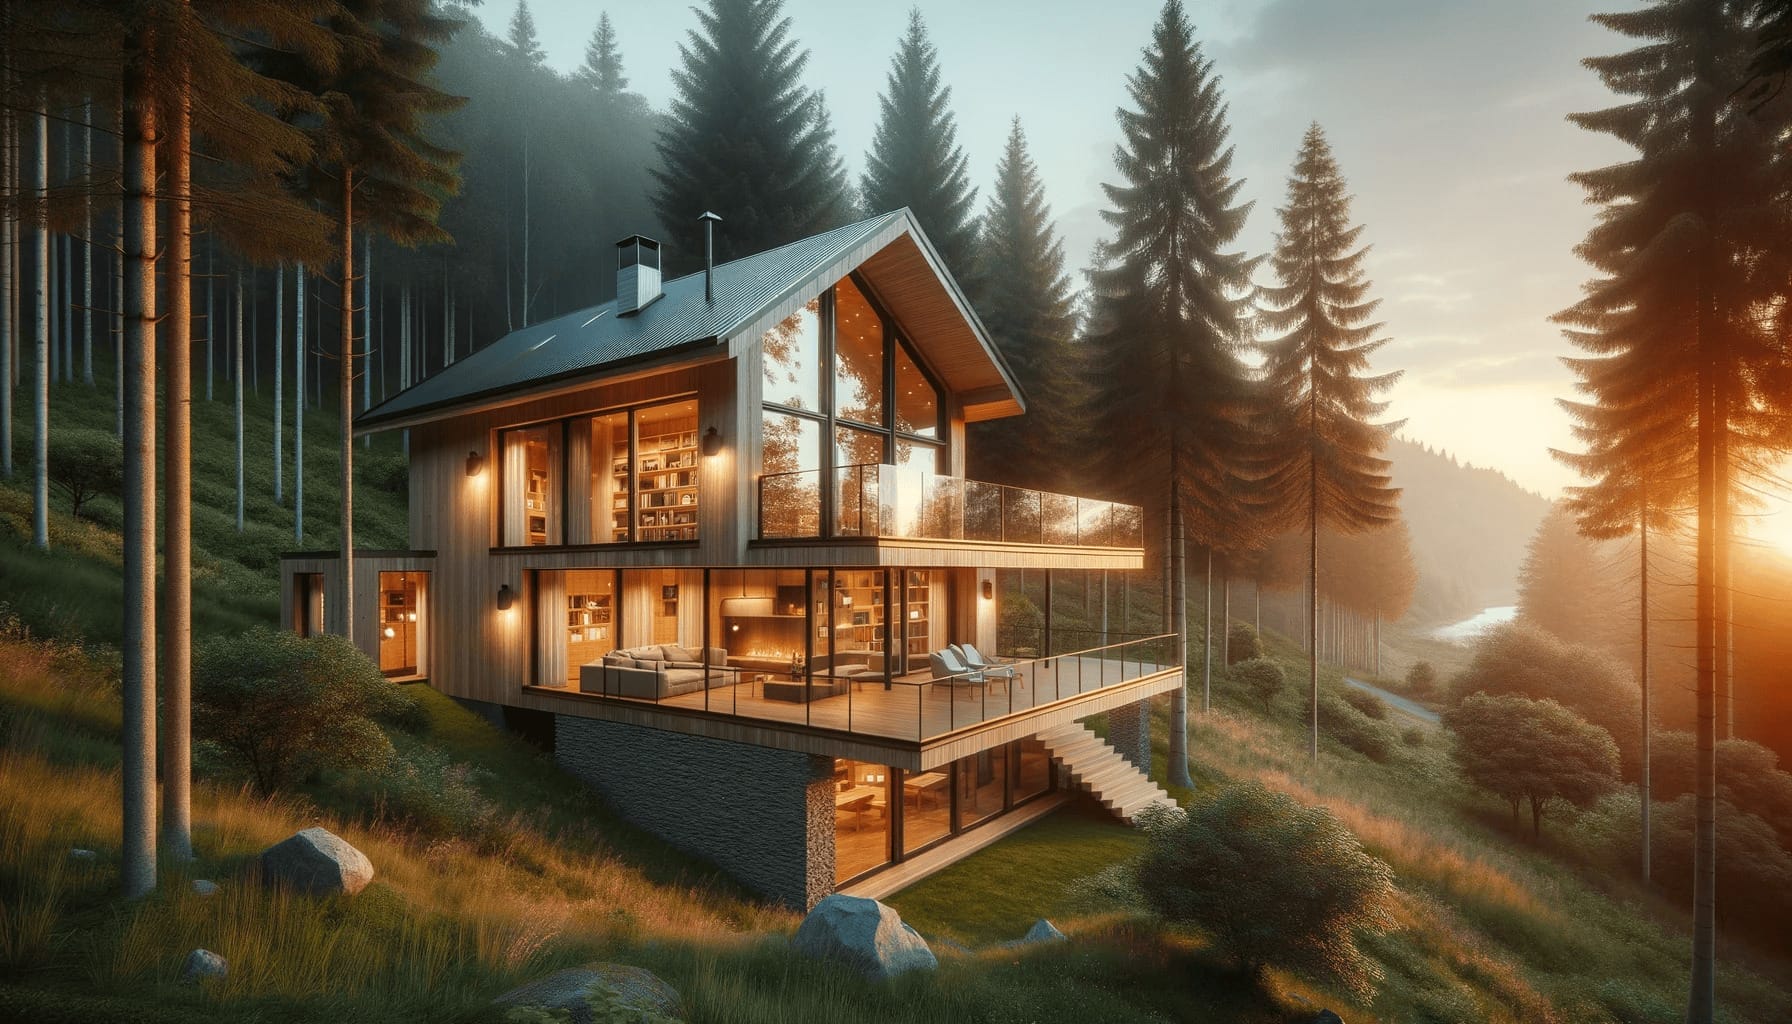 DALL·E 2023 10 19 09.11.58 Photo of a modern cabin house nestled in a picturesque forest setting during sunset. The cabins exterior showcases contemporary design elements with